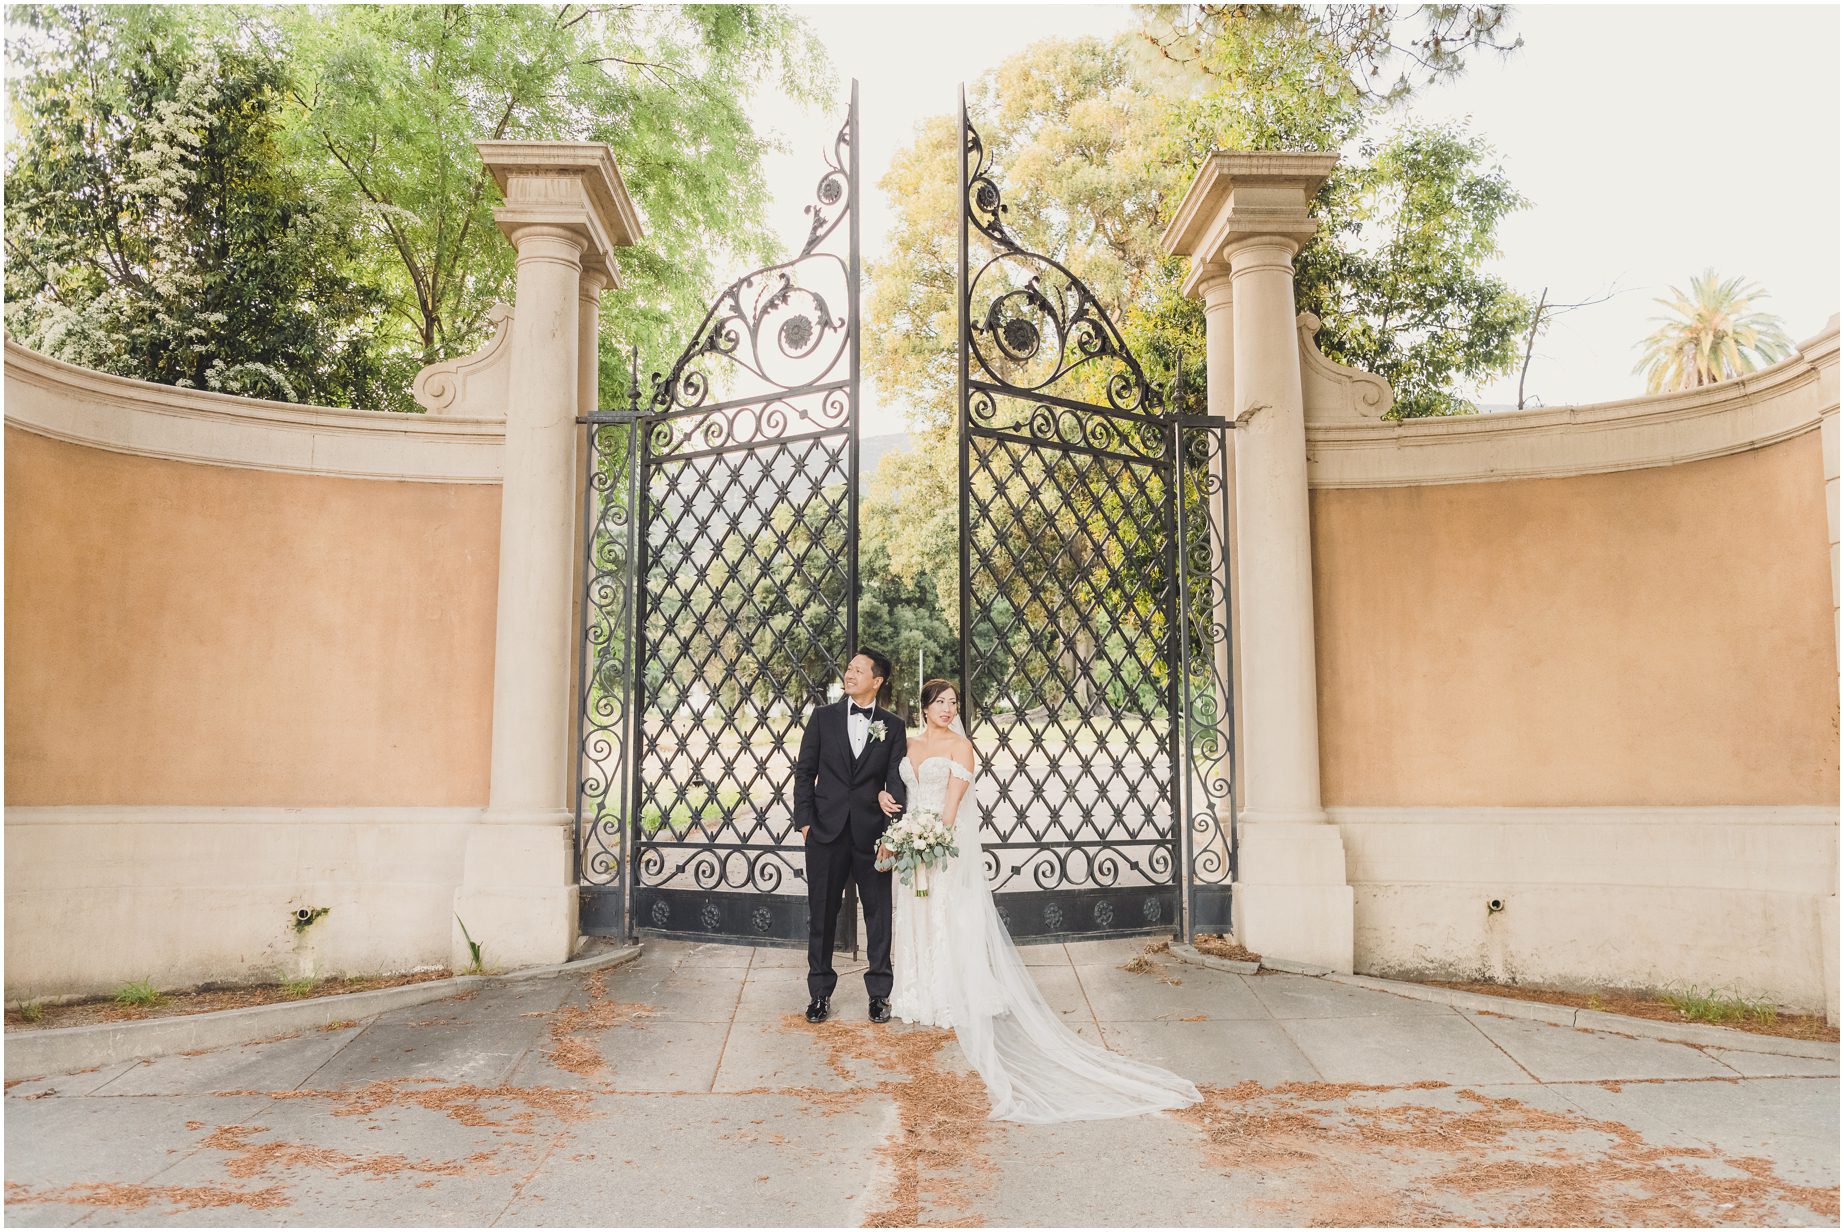 the bride and groom stand near a large fairytale-like gate